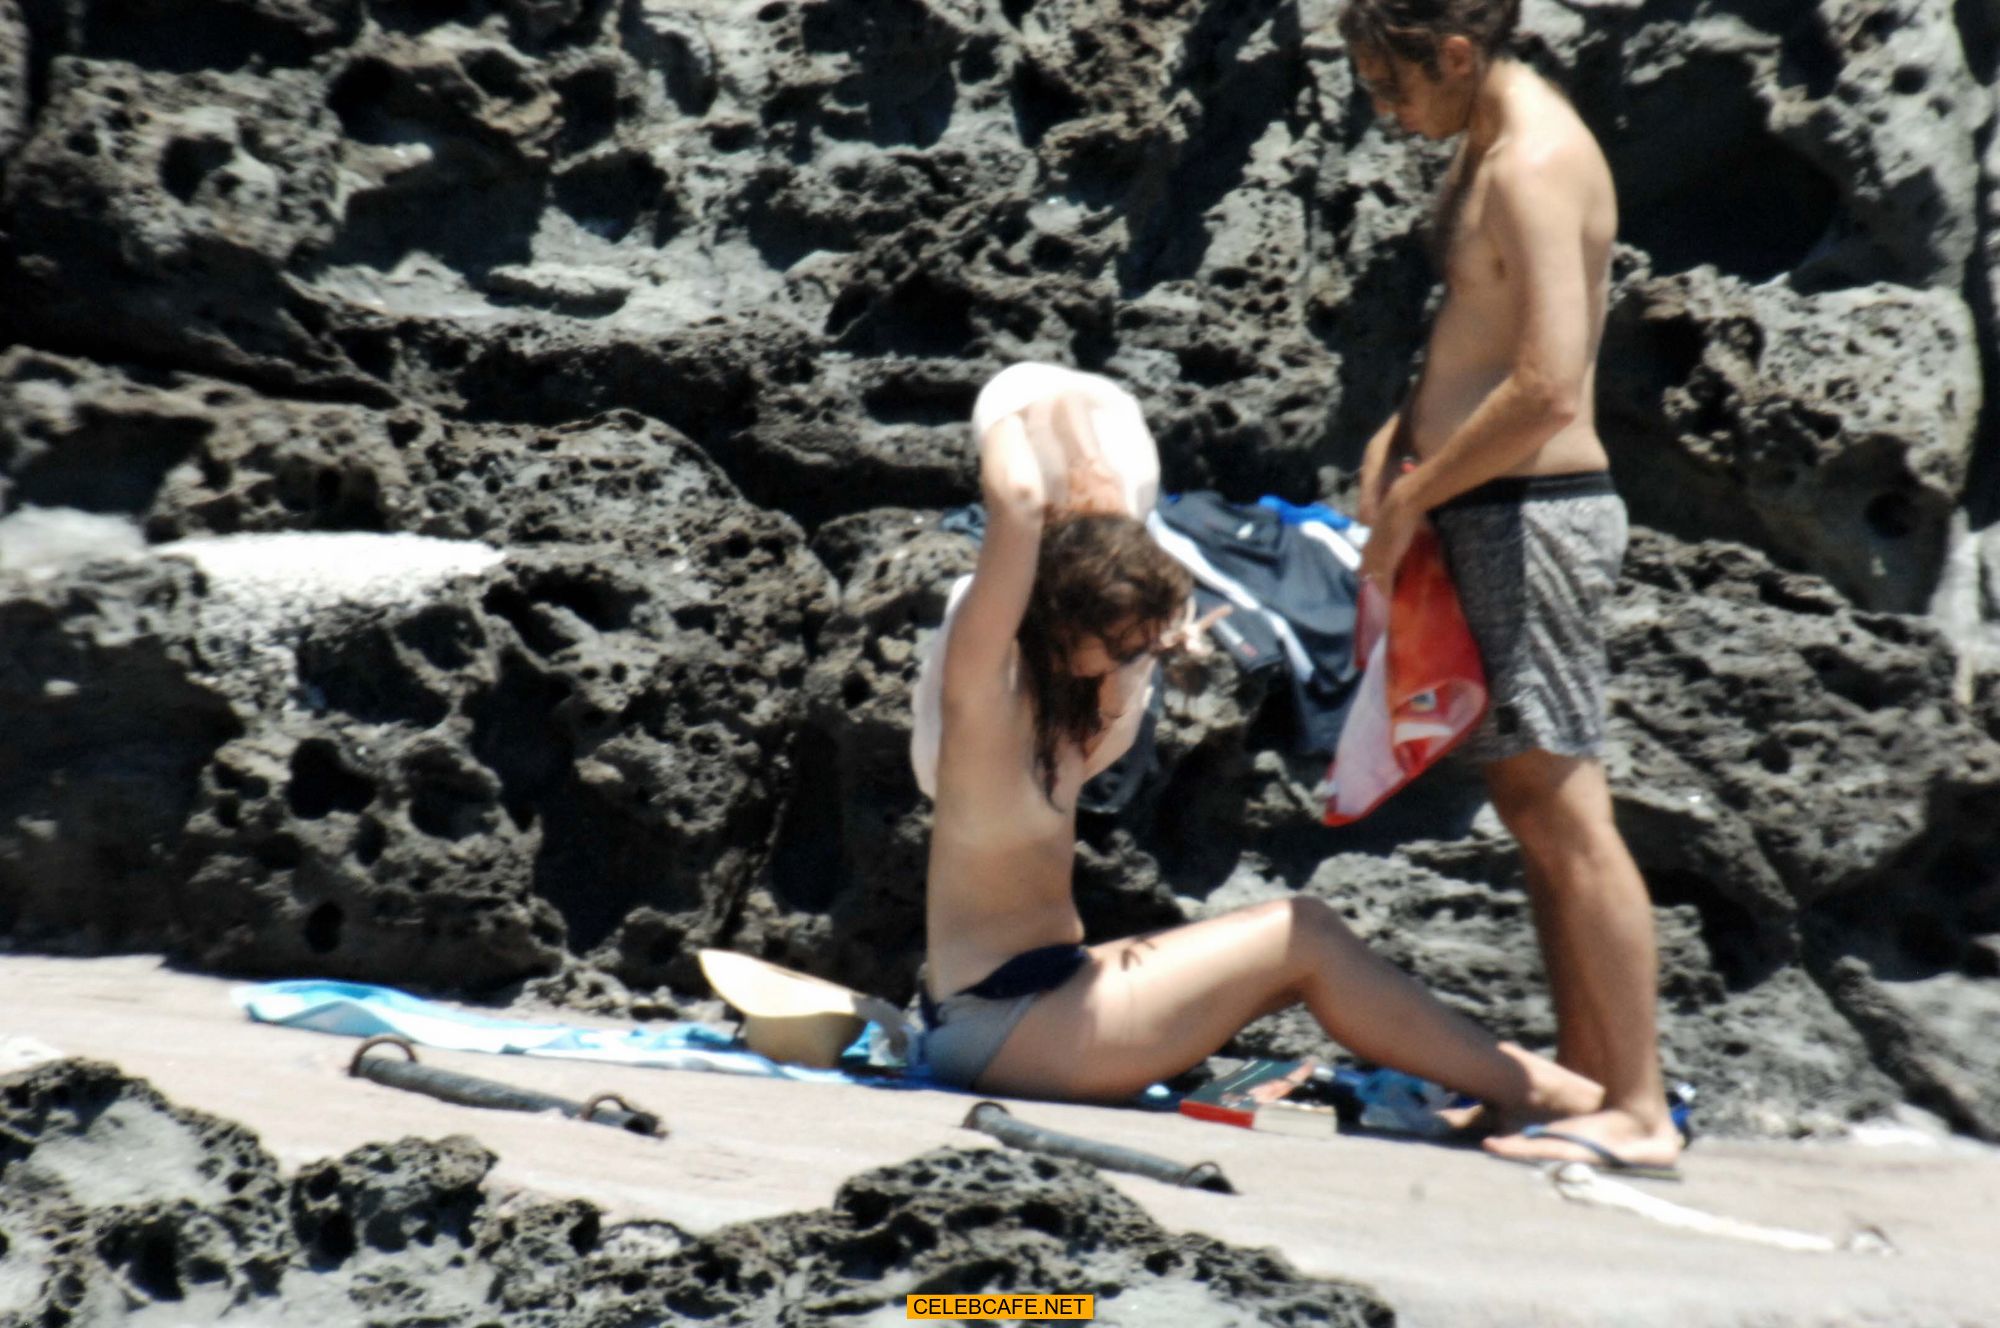 keira_knightley_on_the_beach_in_pantelleria_some_topless_62918_17.jpg